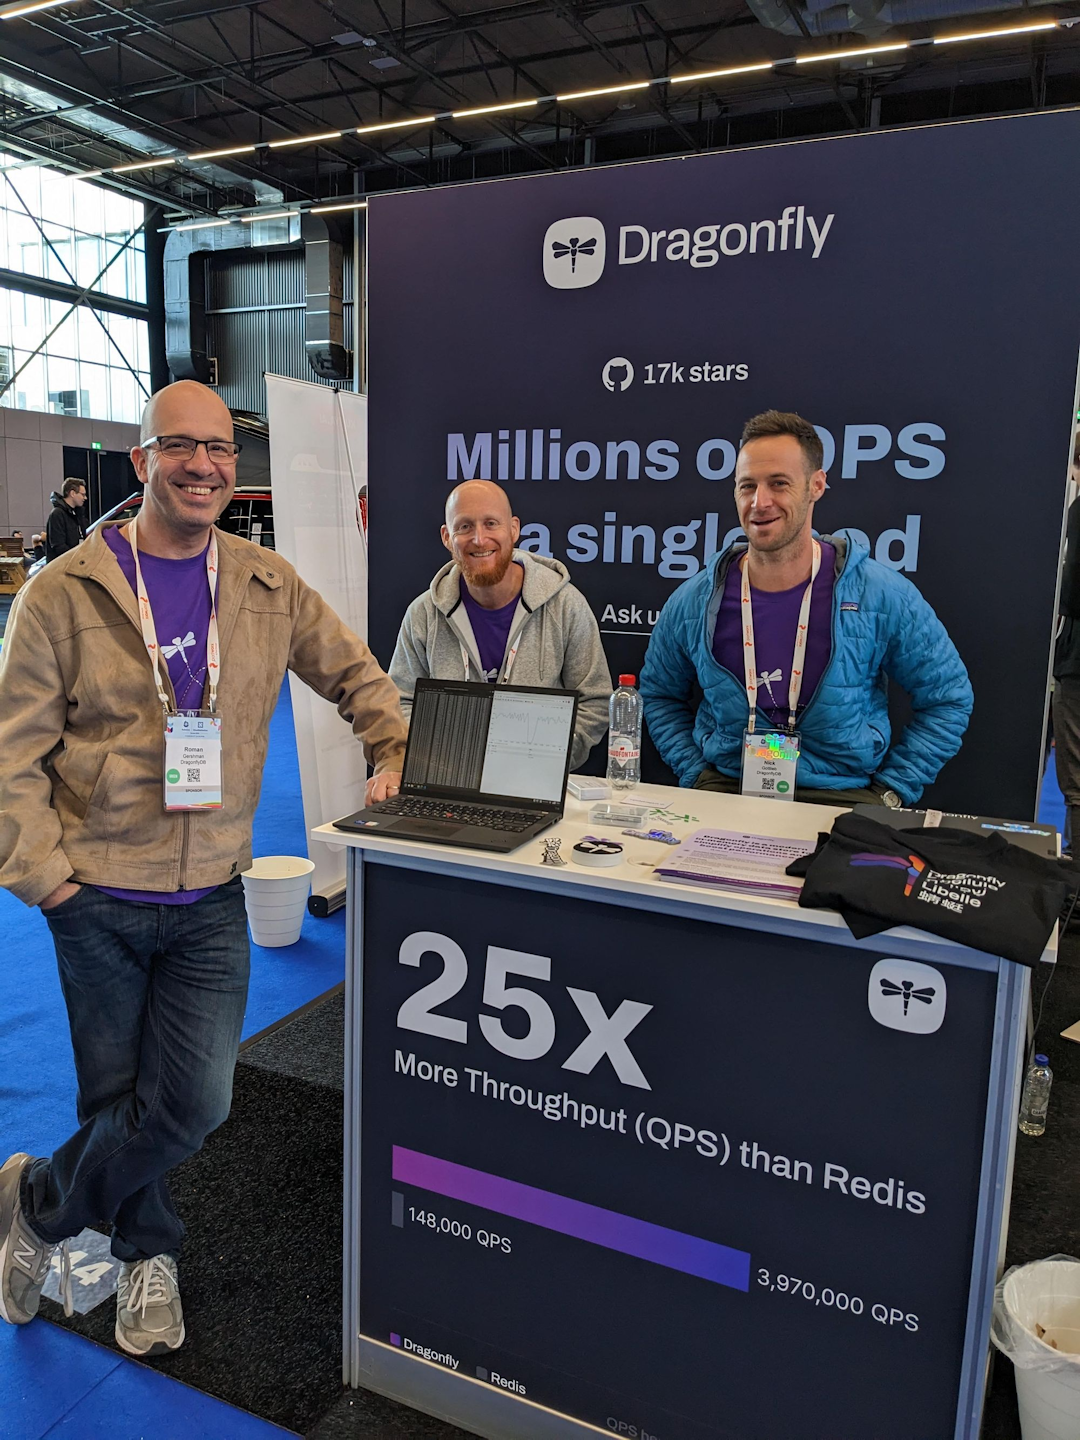 The Dragonfly team at a conference